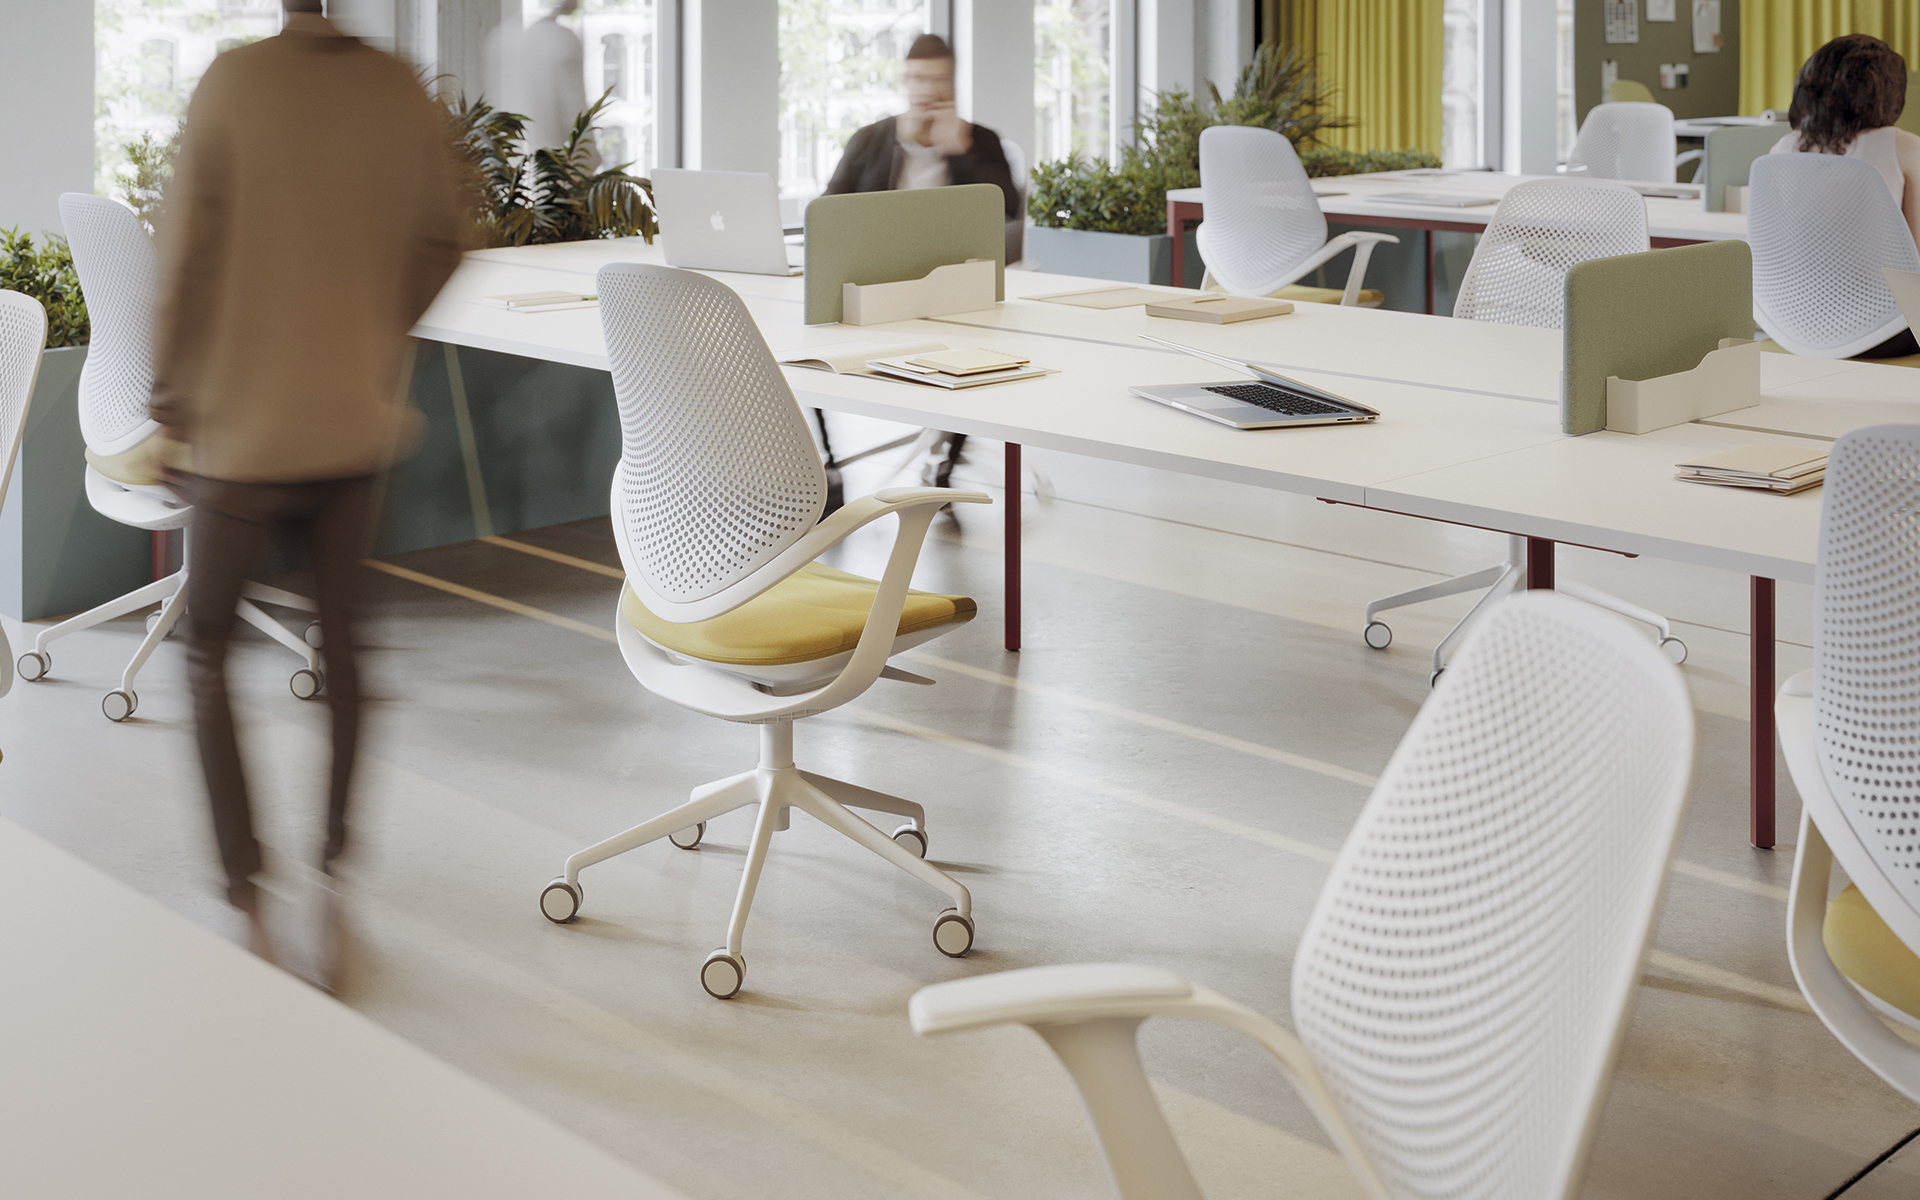 Bright working space equipped with several Forma 5 Flow office chairs by ITO Design with padded seating surfaces in yellow, back and armrests in white.